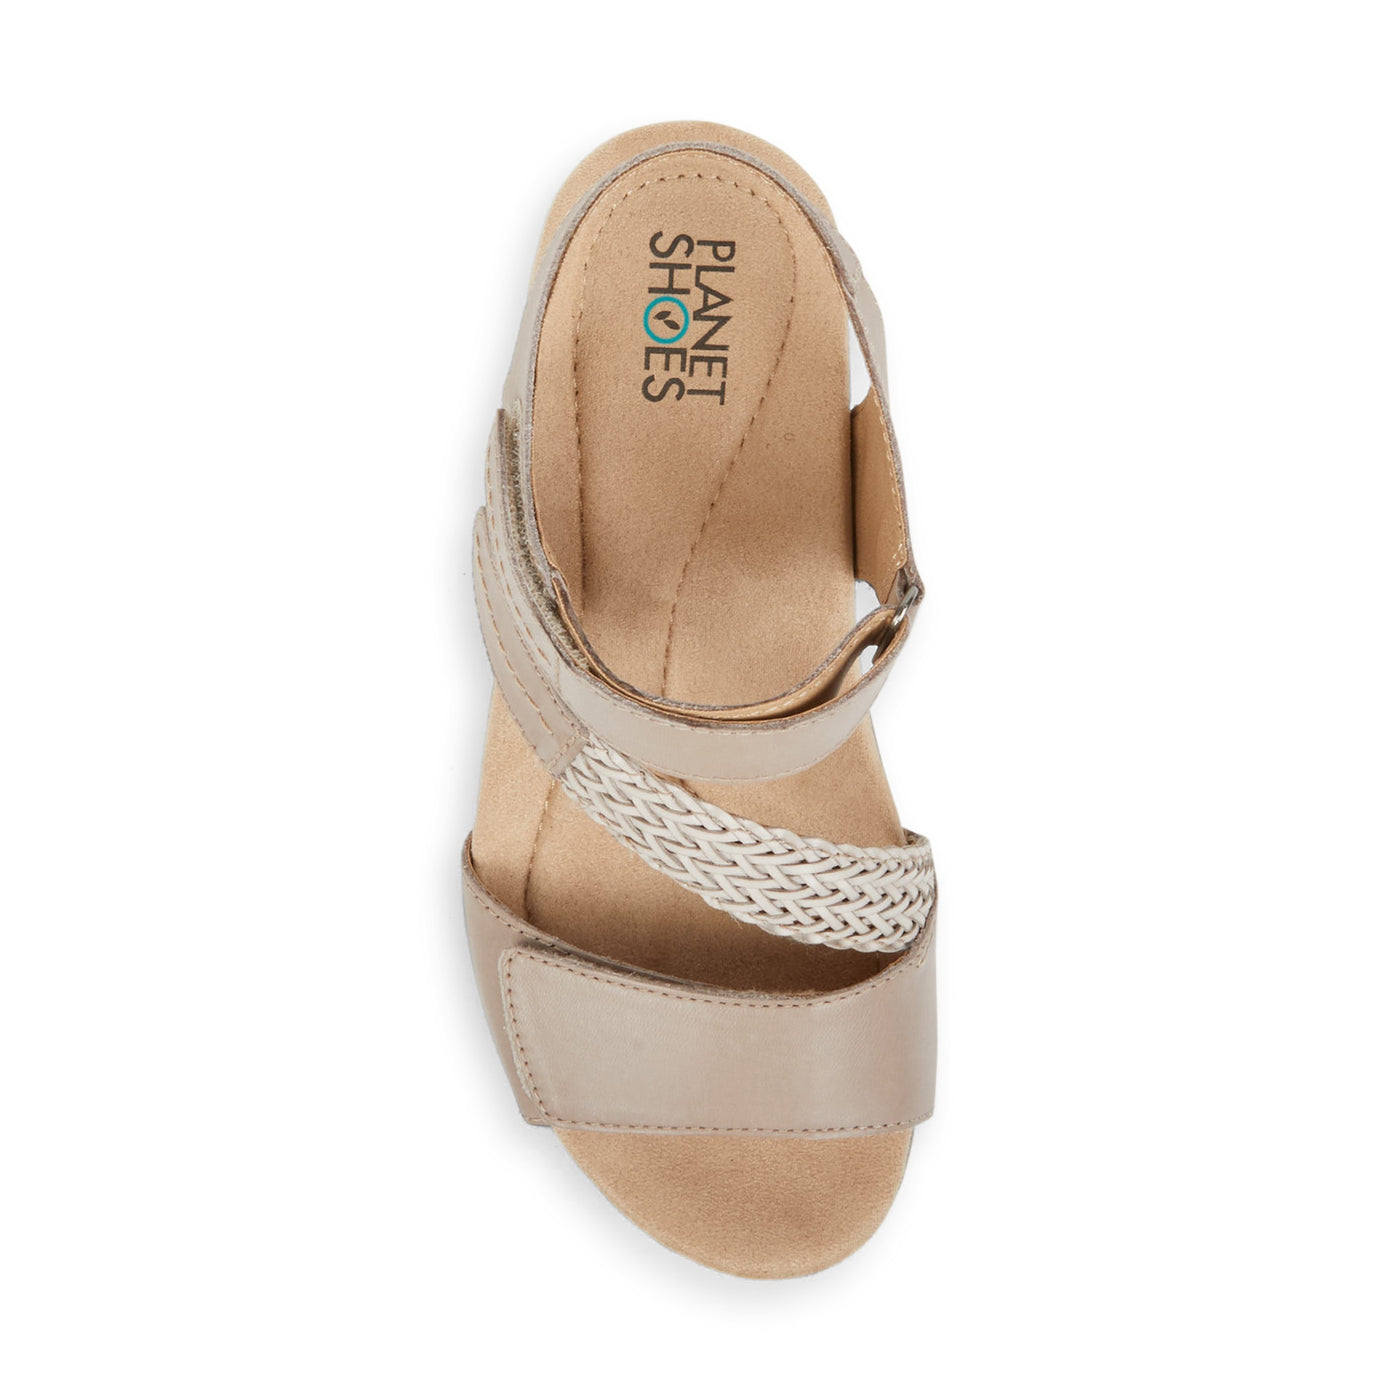 PLANET SHOES NOMAD TAUPE - Women Sandals - Collective Shoes 